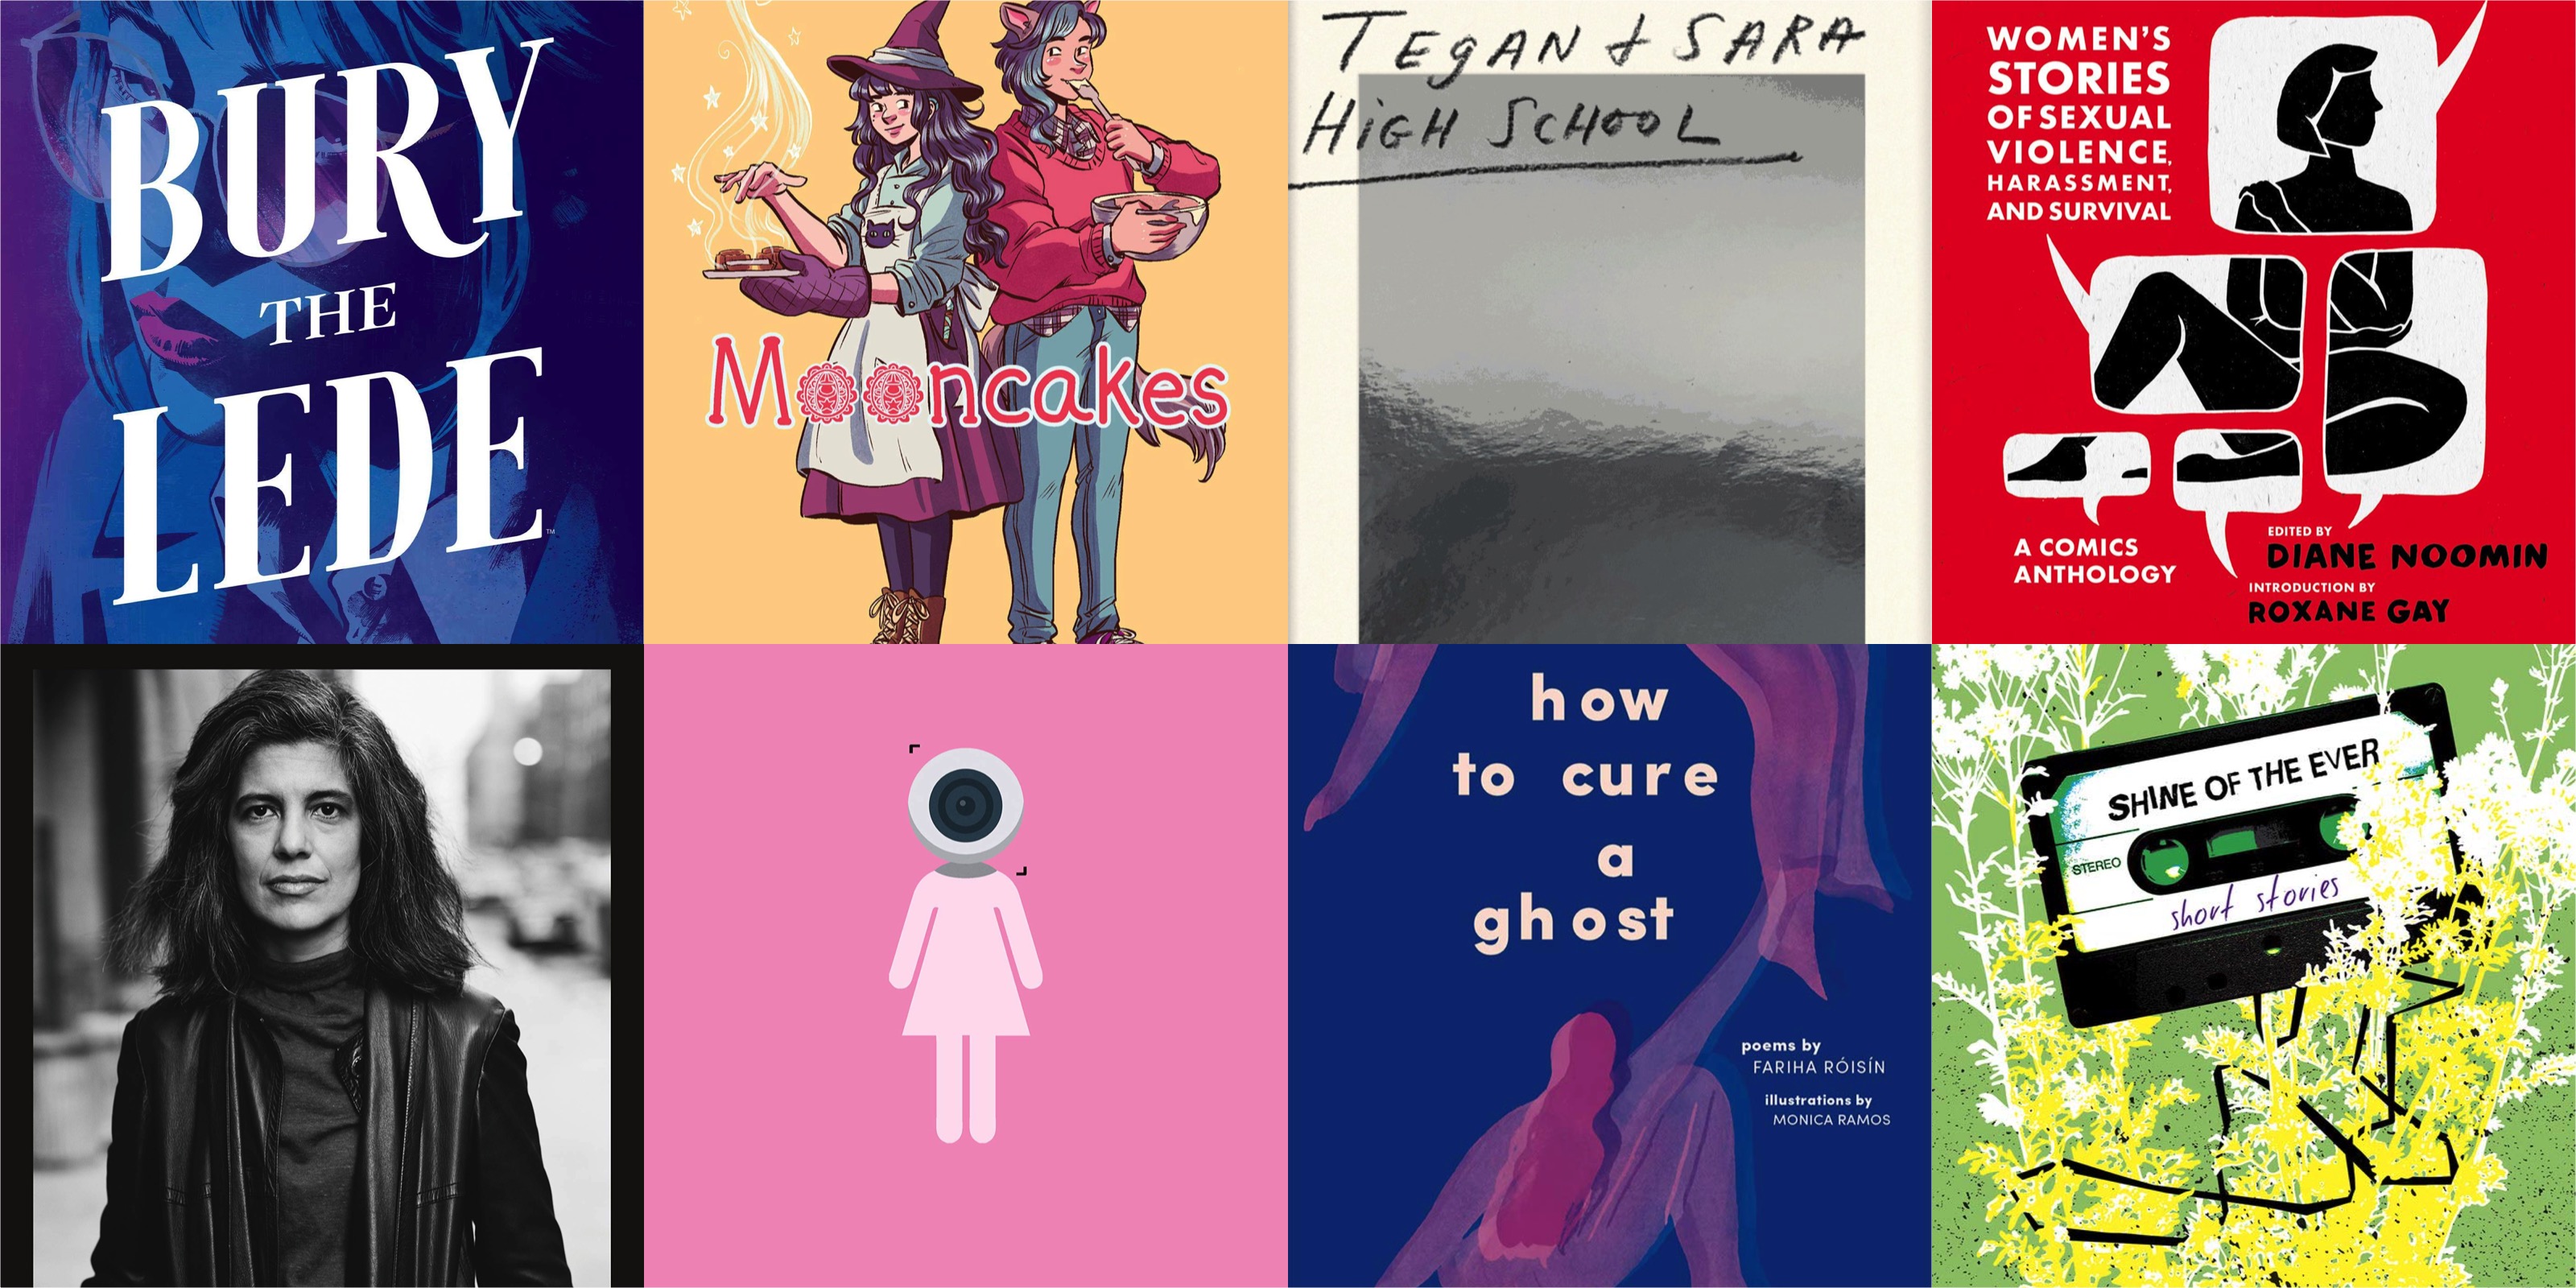 30 New Books of Queer and Feminist Interest to Get Excited About This Fall Autostraddle photo